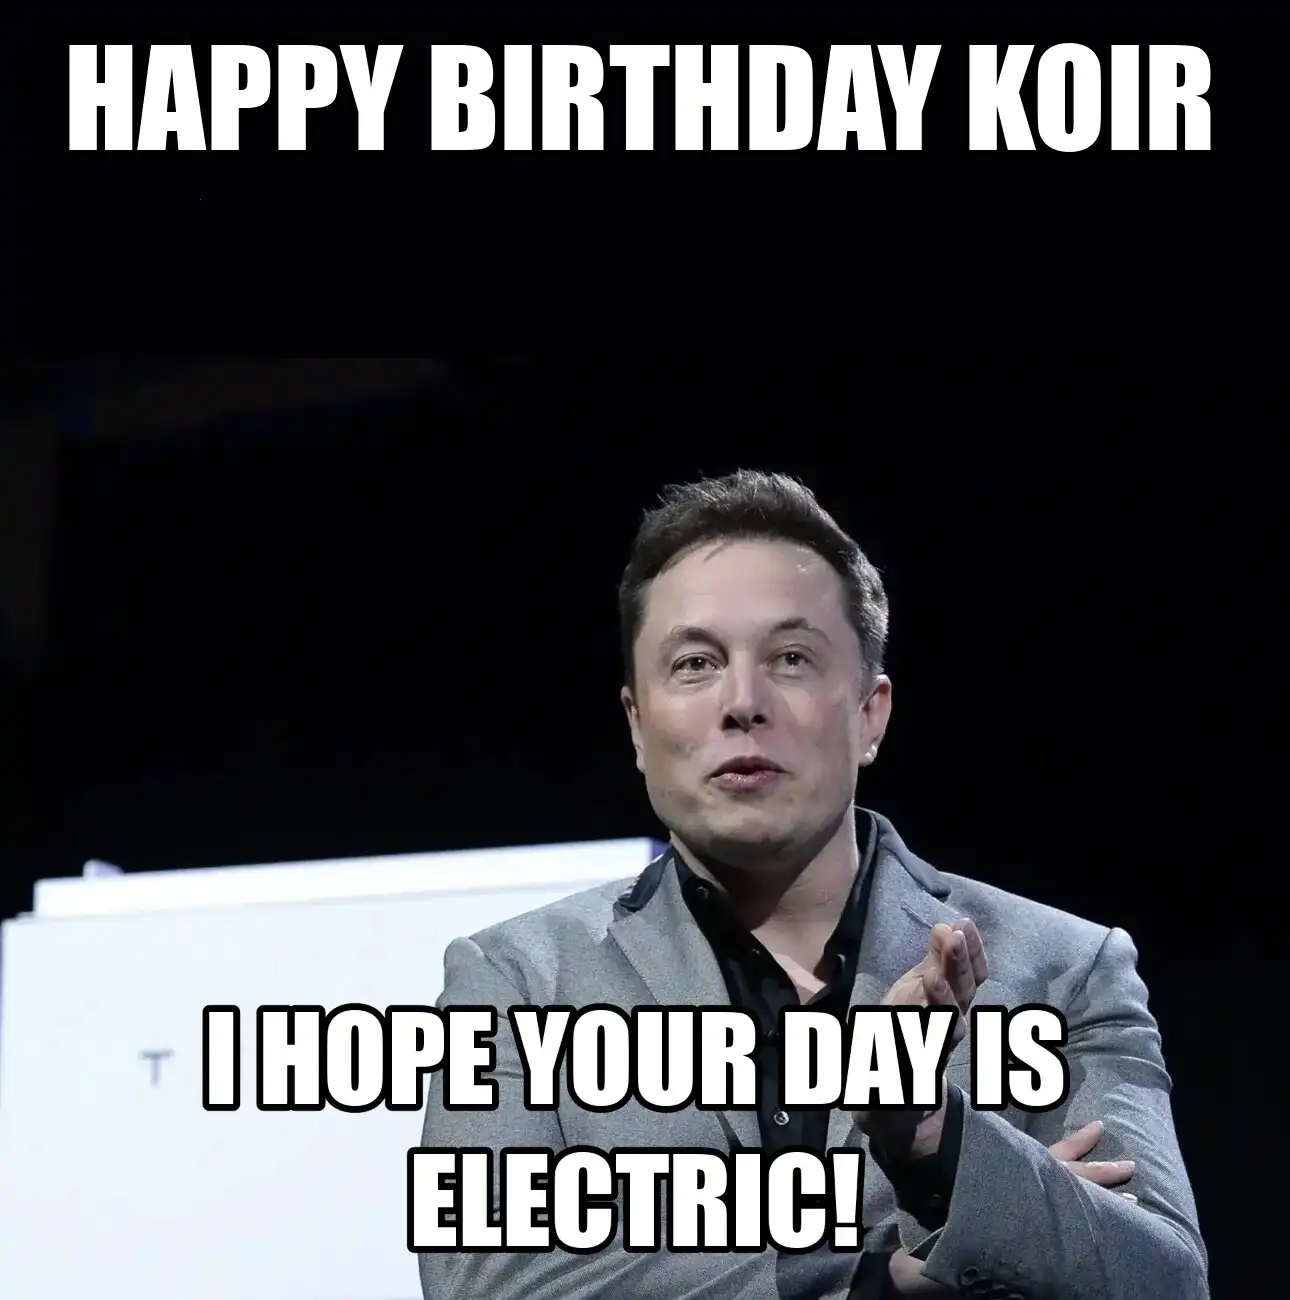 Happy Birthday Koir I Hope Your Day Is Electric Meme